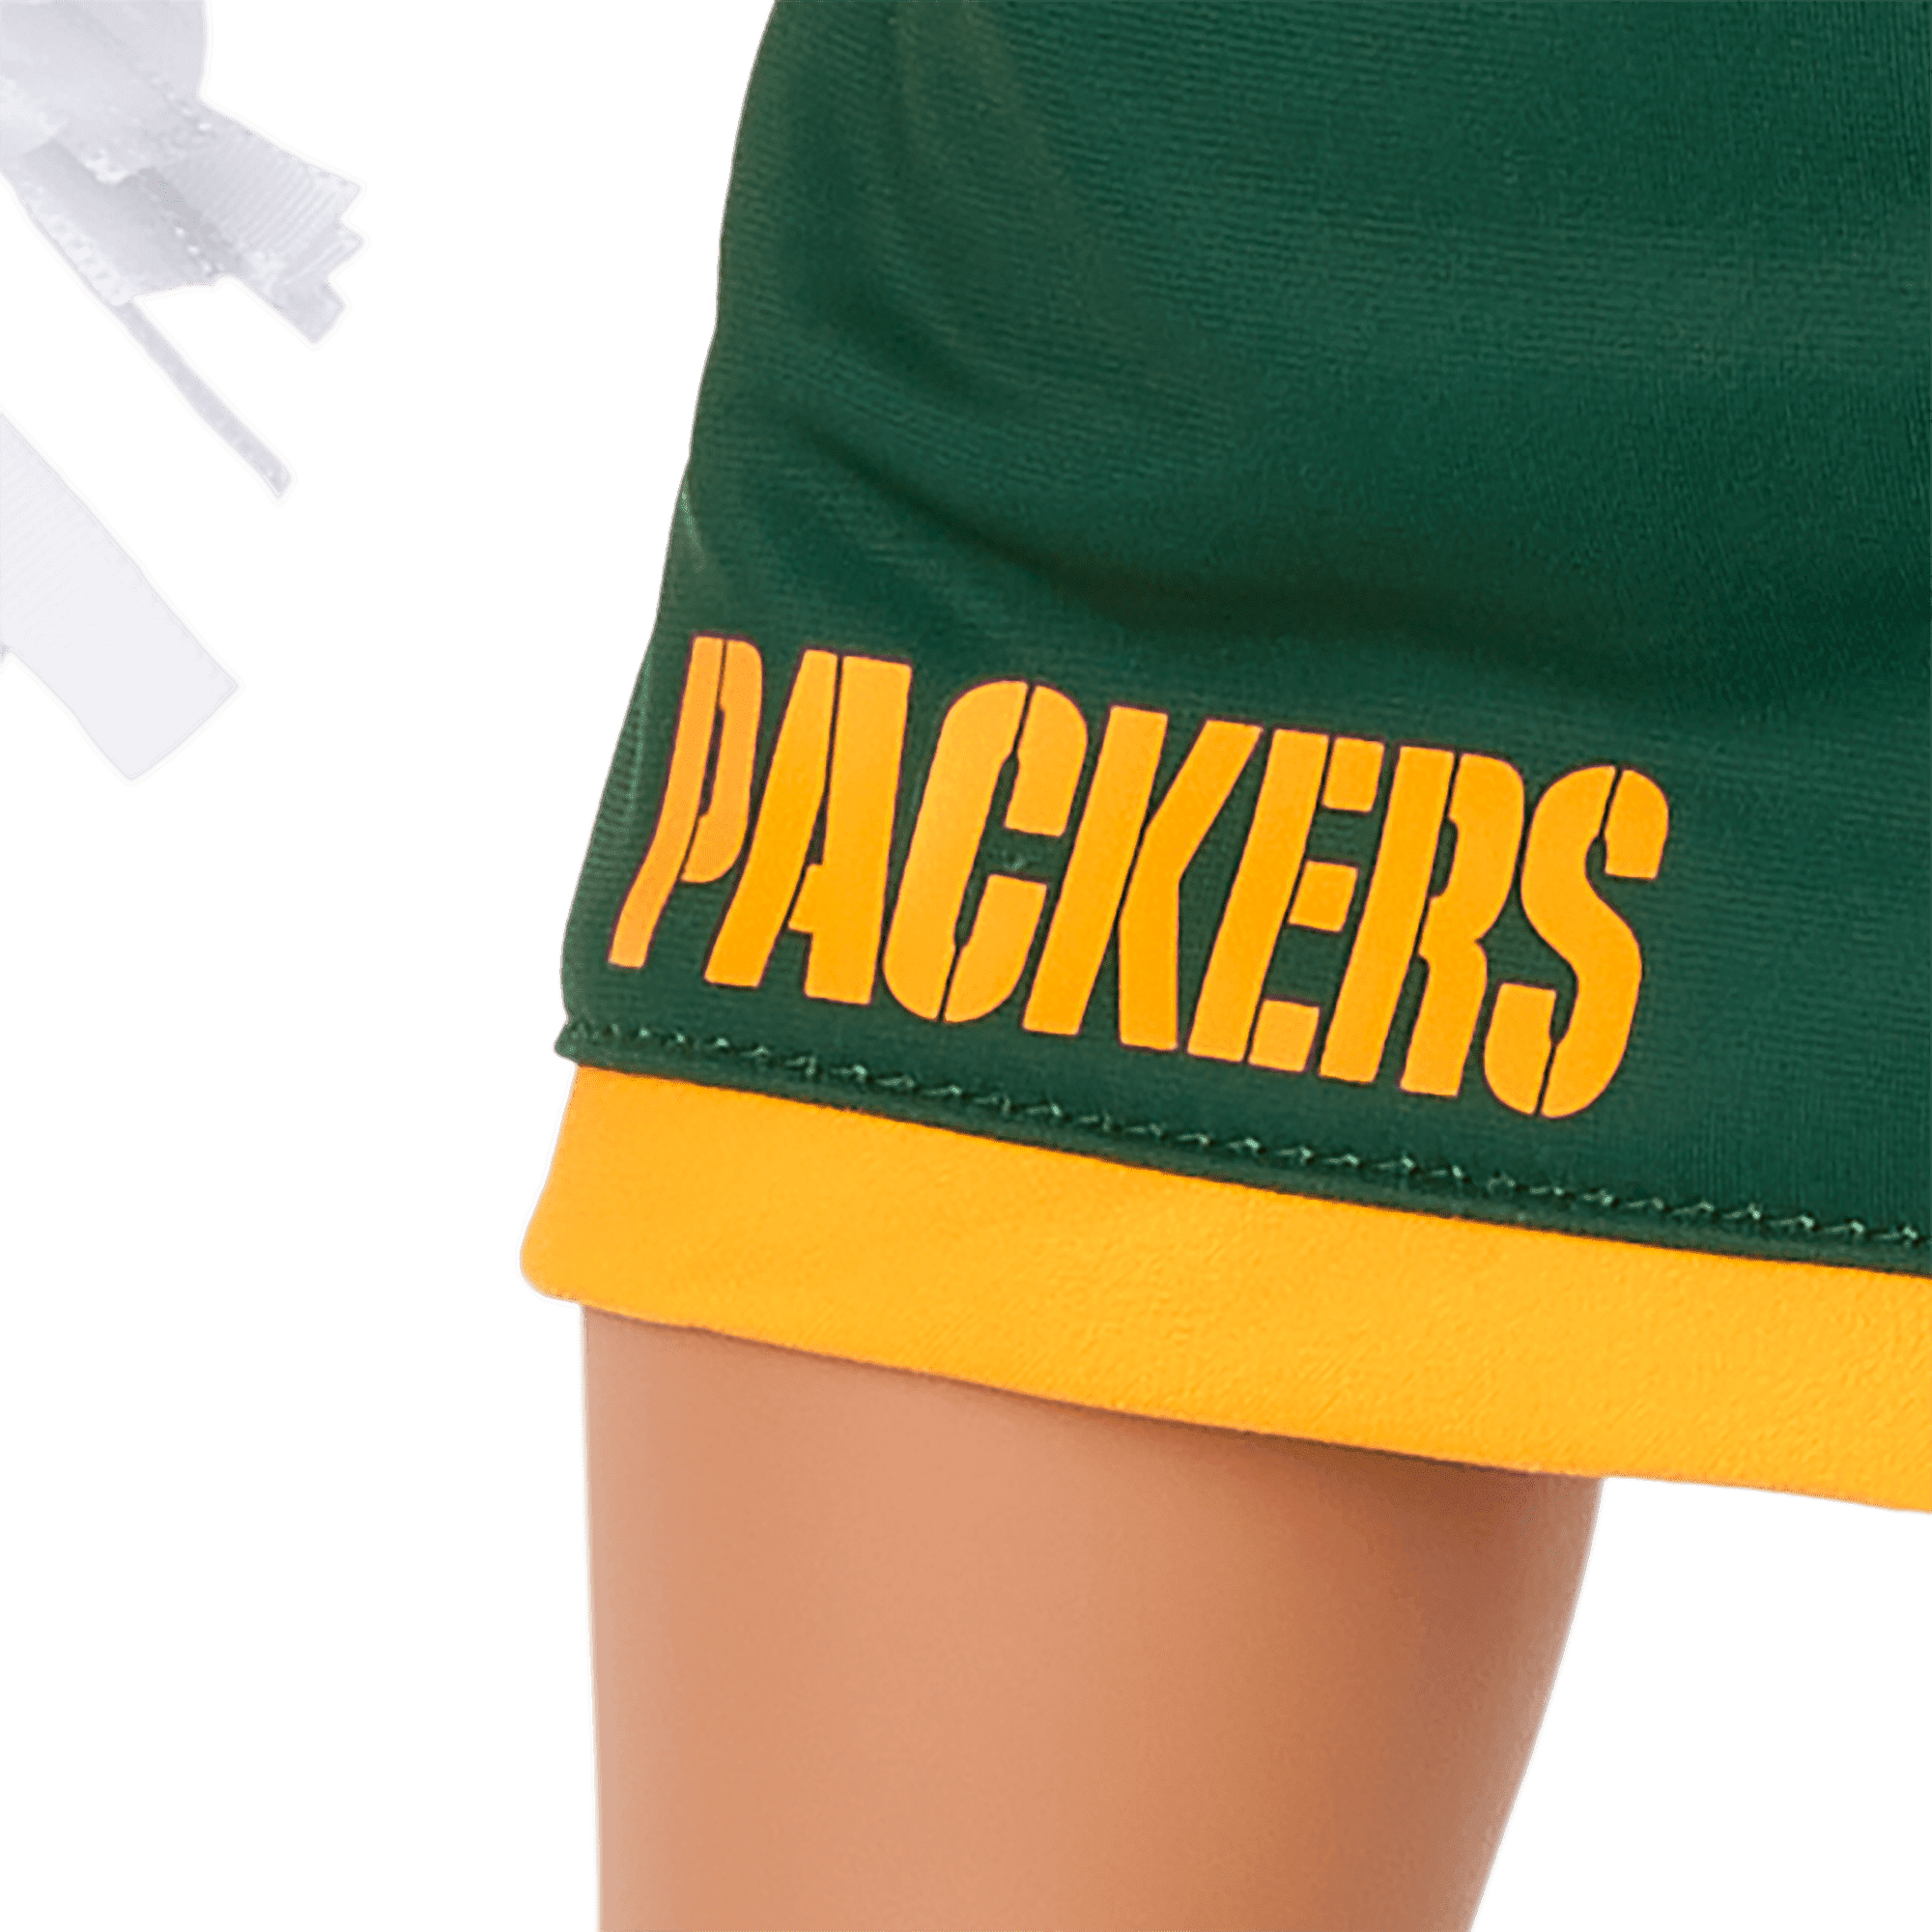 American Girl® x NFL Green Bay Packers Cheer Uniform for 18-inch Dolls